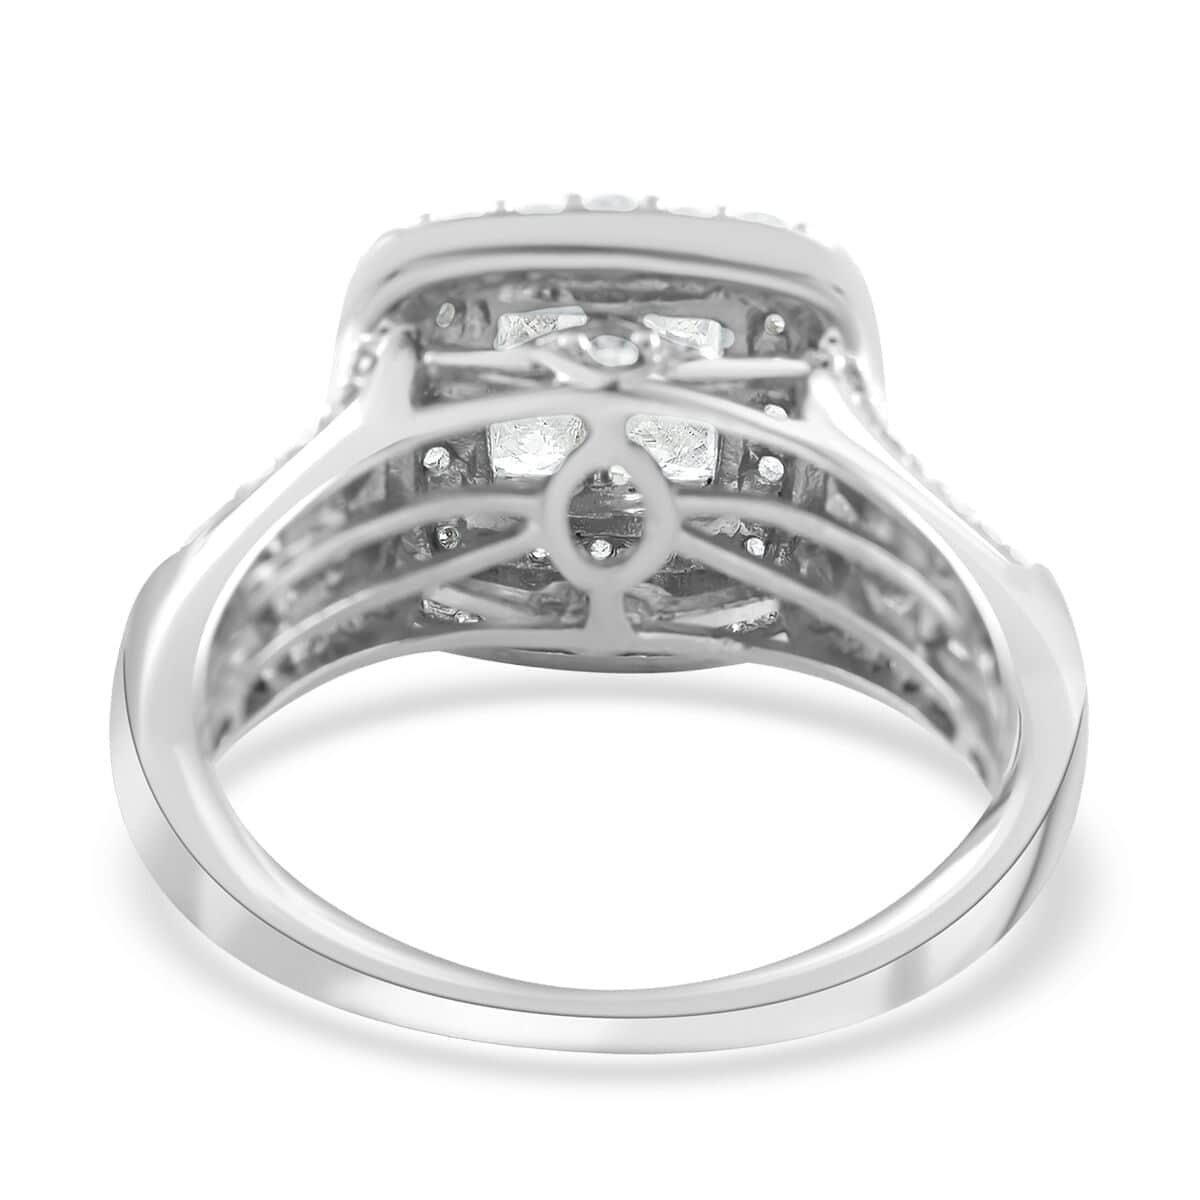 10K White Gold Diamond Ring 5.70 Grams 1.75 ctw (Delivery in 10-15 Business Days) image number 4